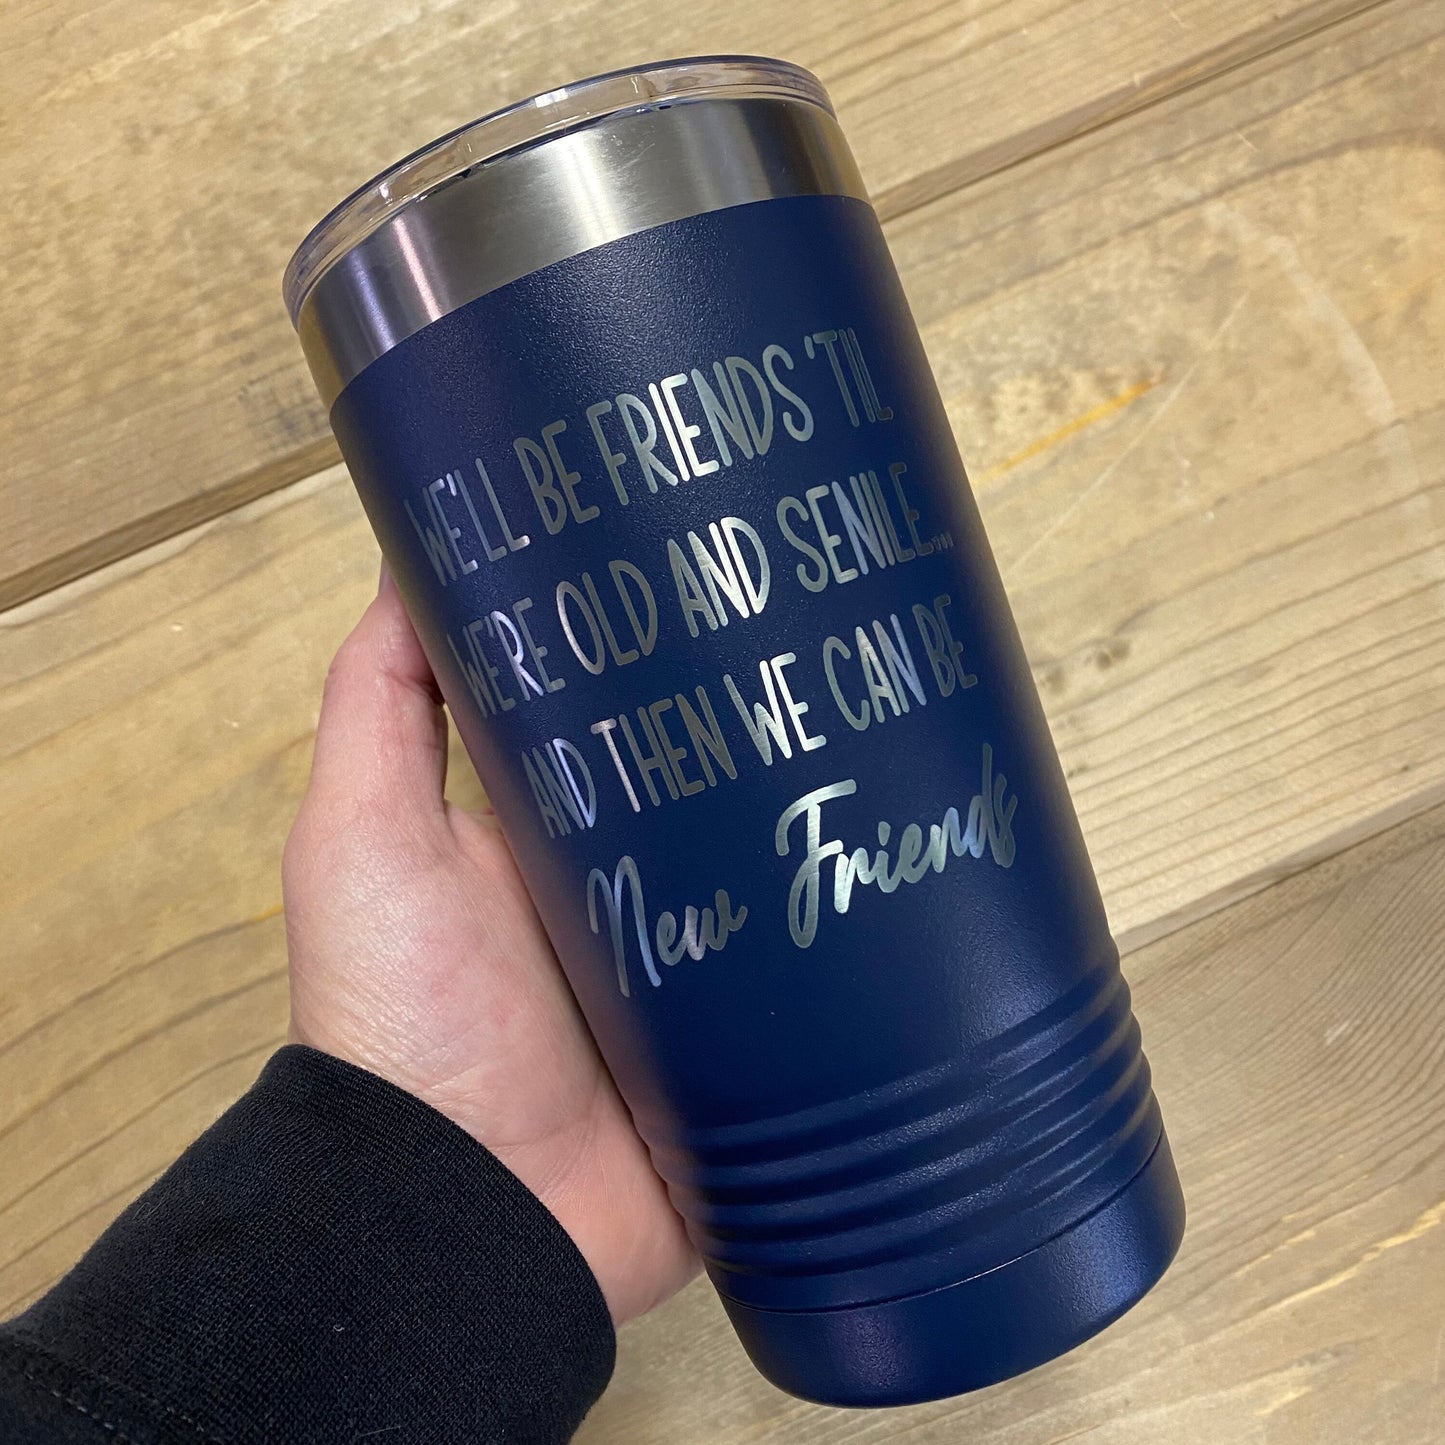 We’ll be friends ‘til we’re old and senile...and then we can be new friends 20oz. Stainless Steel Tumbler